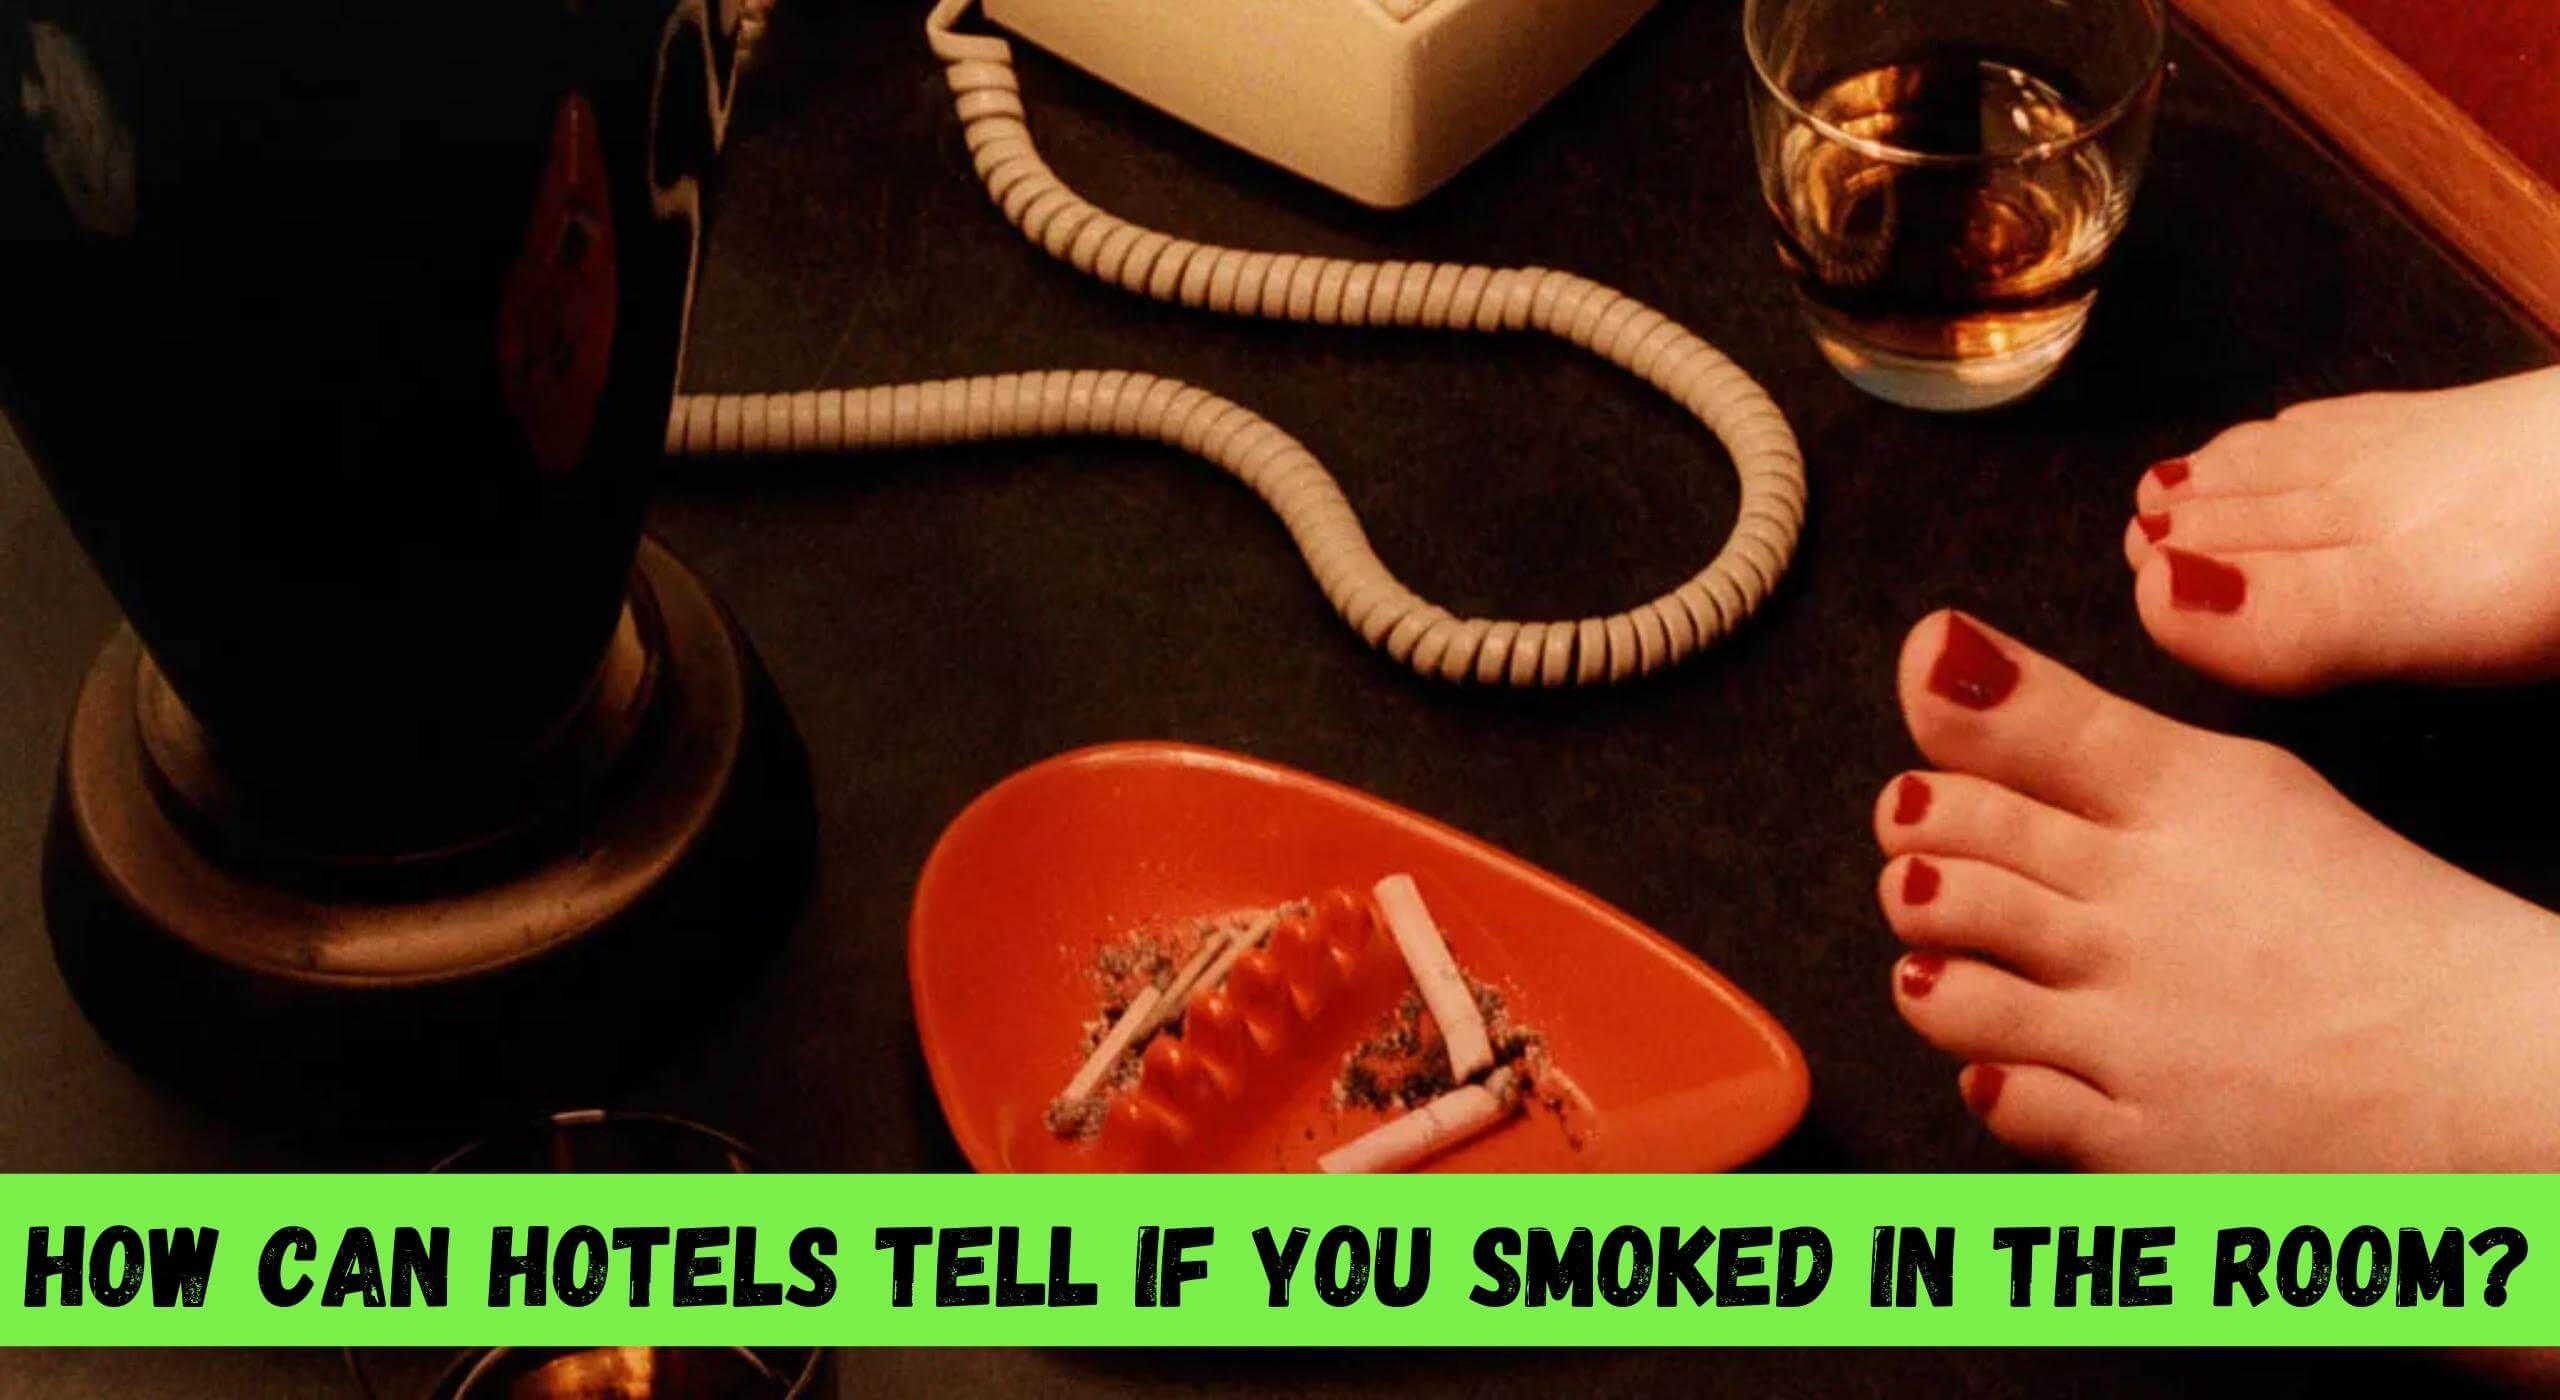 How Can Hotels Tell If You Smoked In The Room?